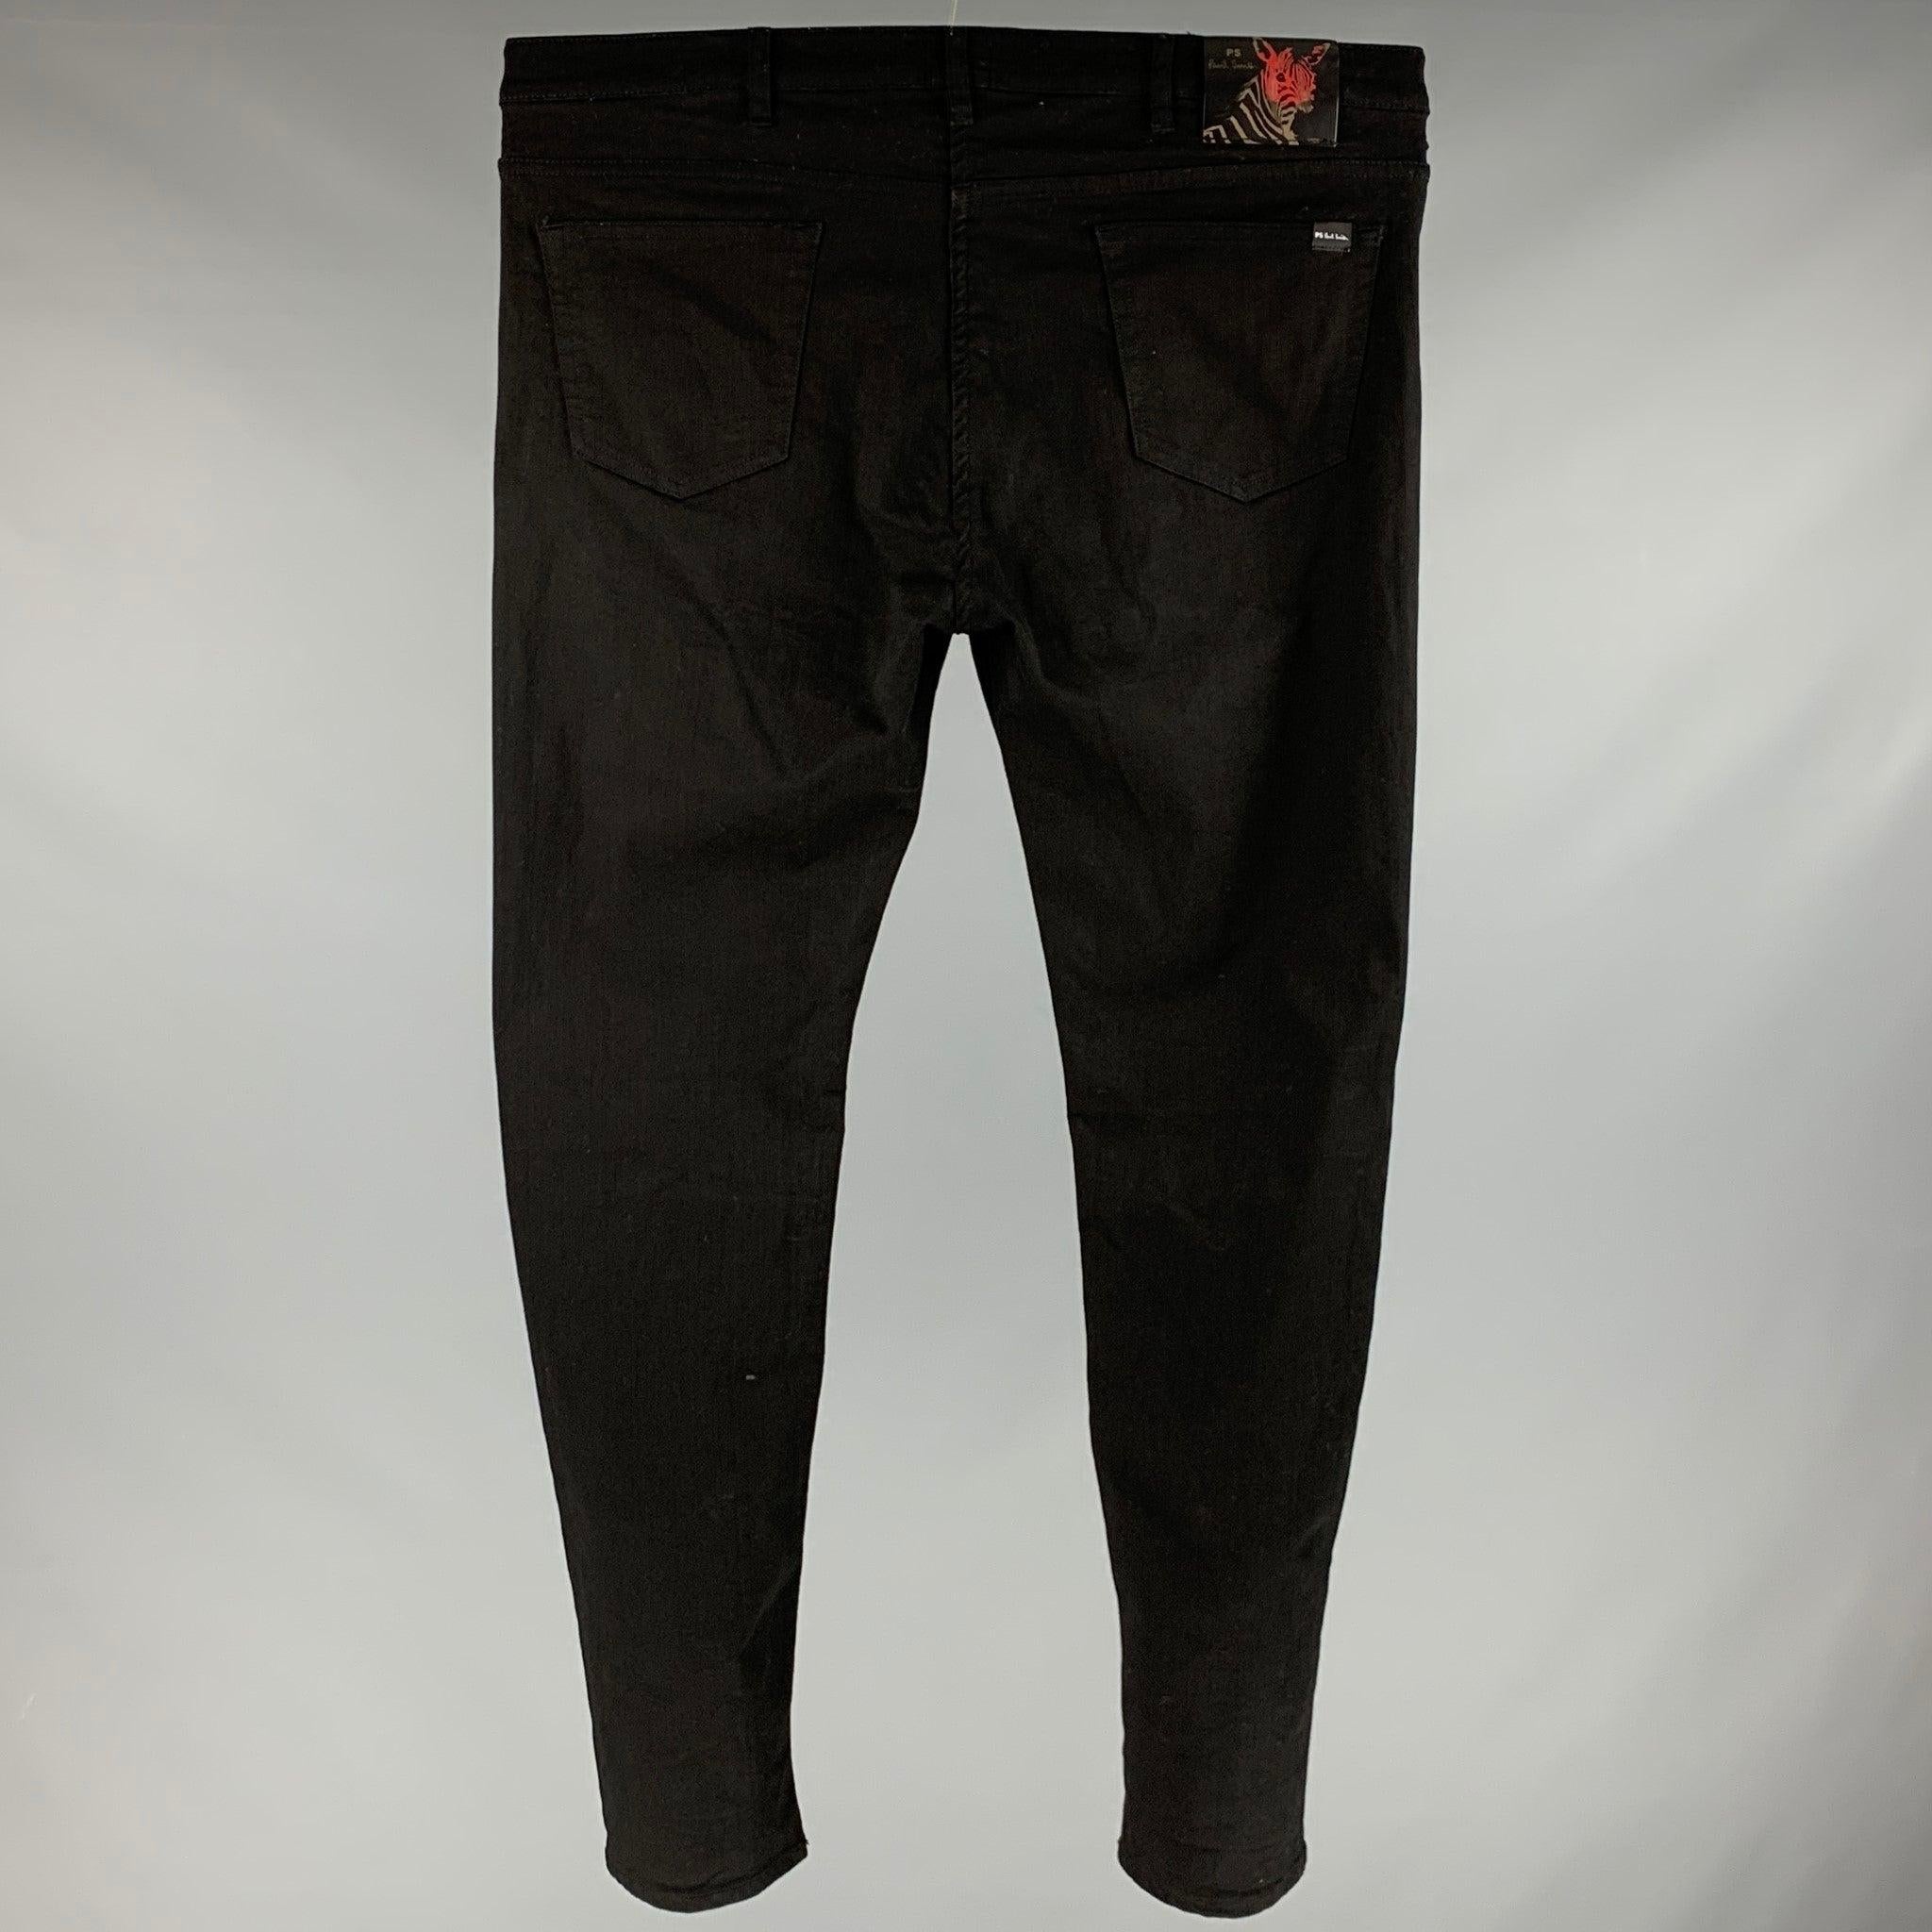 PS by PAUL SMITH jeans
in a black cotton blend fabric featuring five pockets style, slim fit, and zip fly closure. Made in Canada.Very Good Pre-Owned Condition. Minor signs of wear. 

Marked:   36 

Measurements: 
  Waist: 36 inches Rise: 9 inches